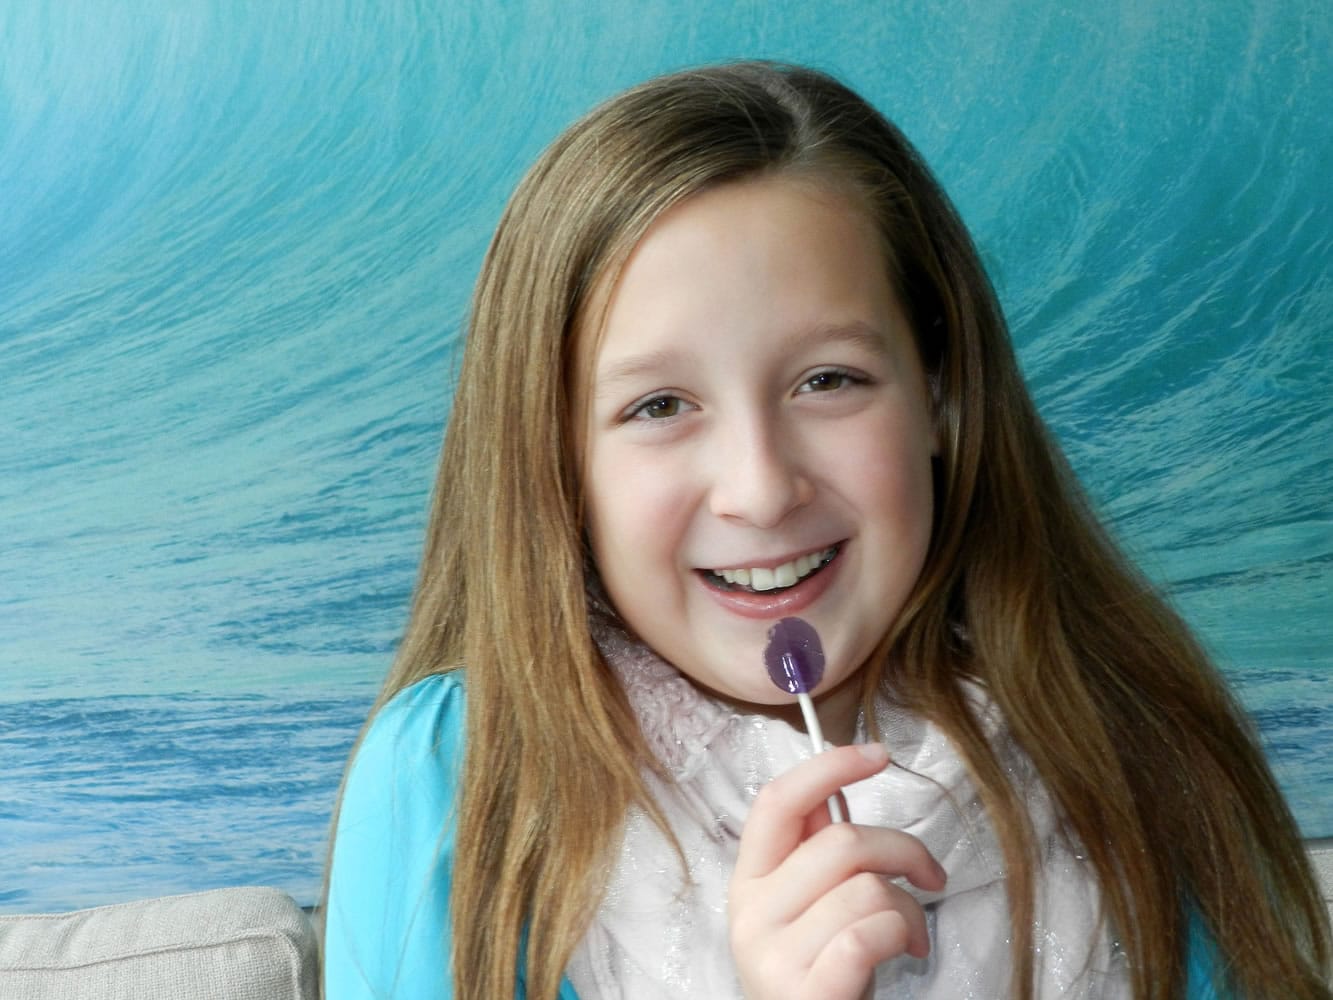 Morse family
Alina Morse, 9, of Michigan is the founder of Zollipops, a line of sugar-free lollipops that even a dentist could find a way to love.